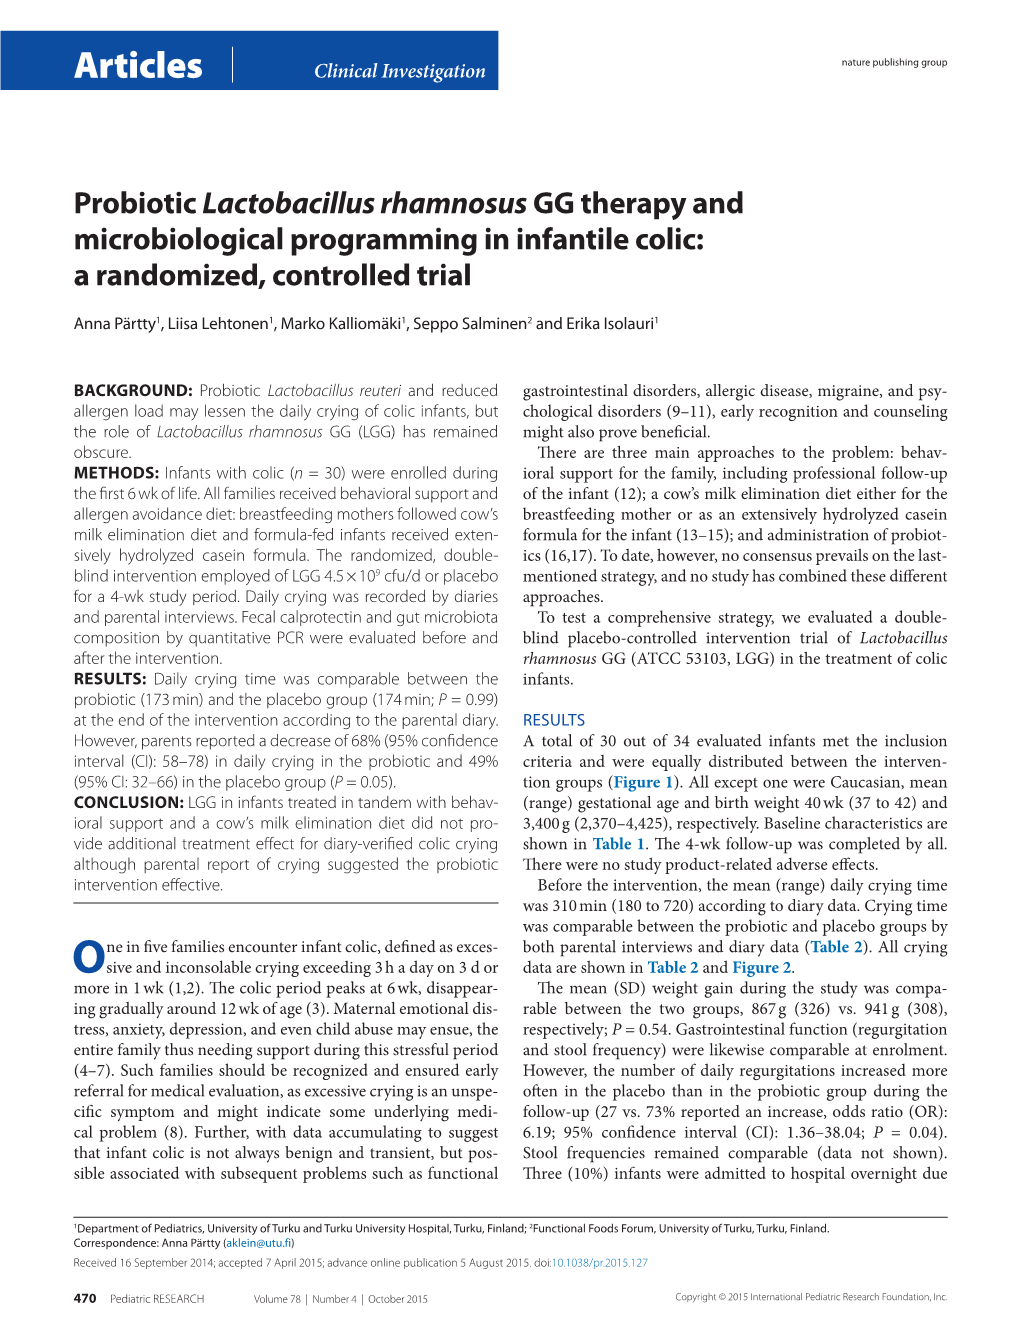 Probiotic Lactobacillus Rhamnosus GG Therapy and Microbiological Programming in Infantile Colic: a Randomized, Controlled Trial